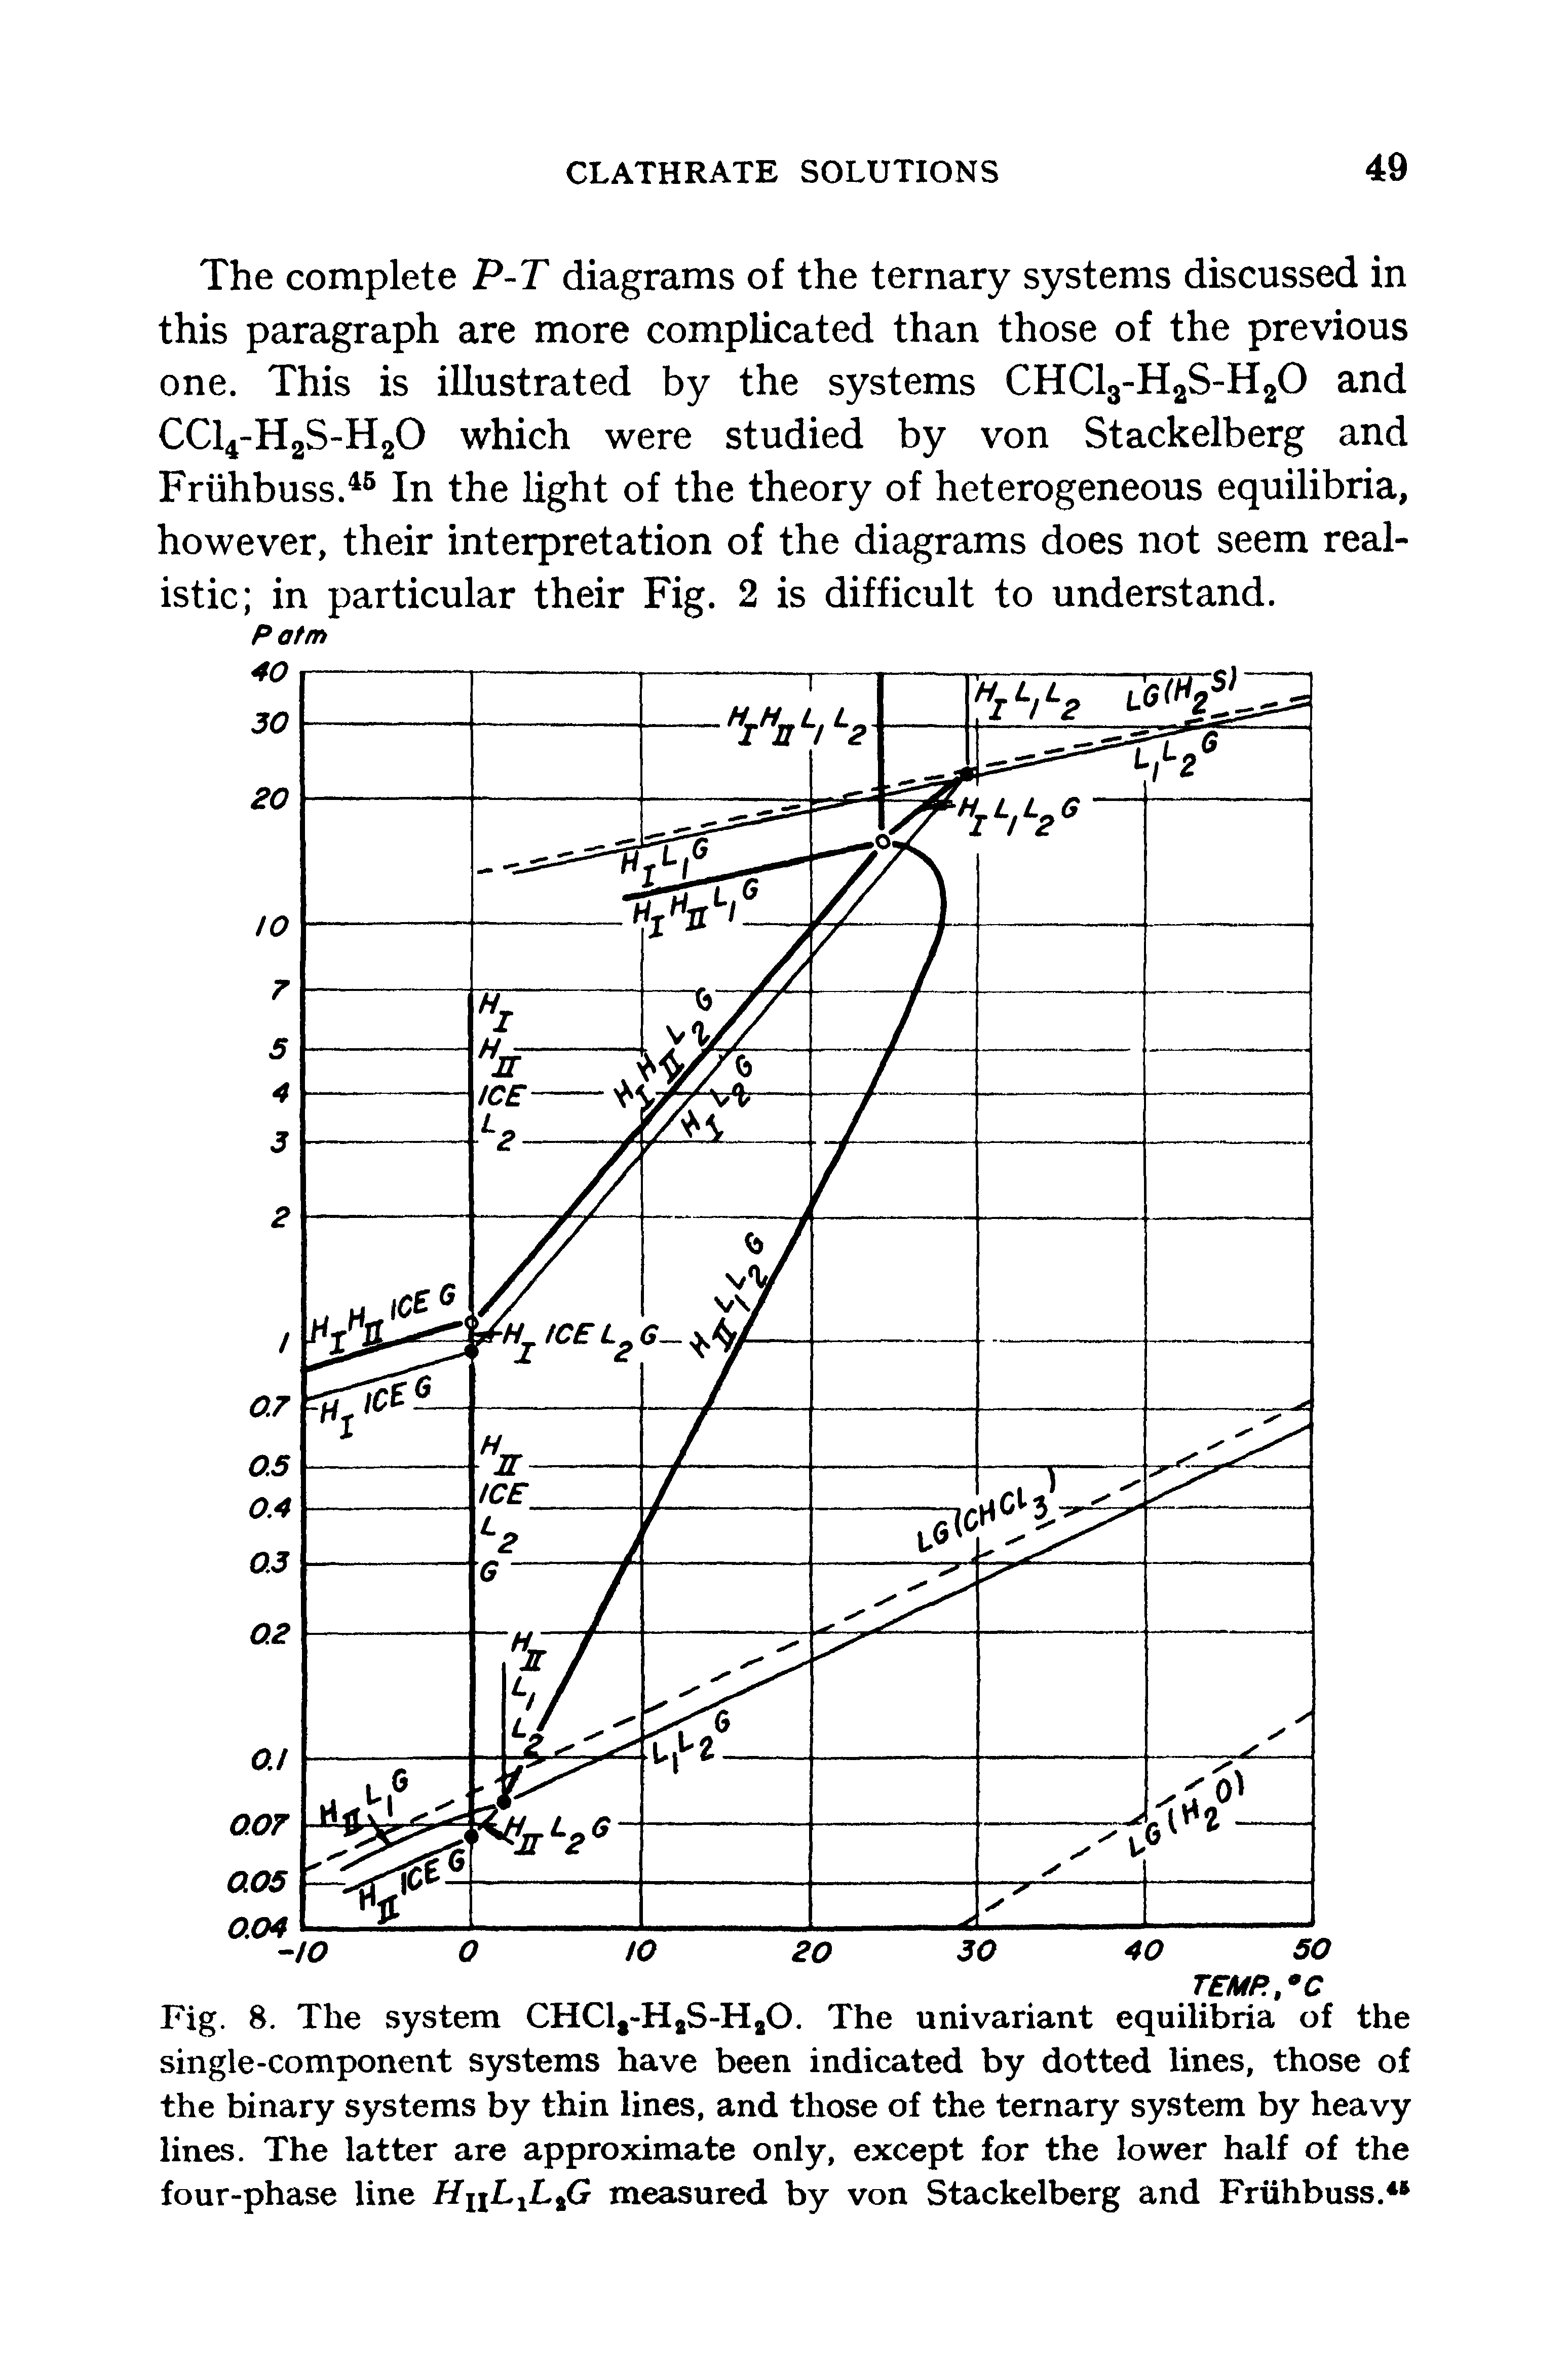 Fig. 8. The system CHCla-HaS-HaO. The univariant equilibria of the single-component systems have been indicated by dotted lines, those of the binary systems by thin lines, and those of the ternary system by heavy lines. The latter are approximate only, except for the lower half of the four-phase line HnLxL%G measured by von Stackelberg and Friihbuss.4 ...